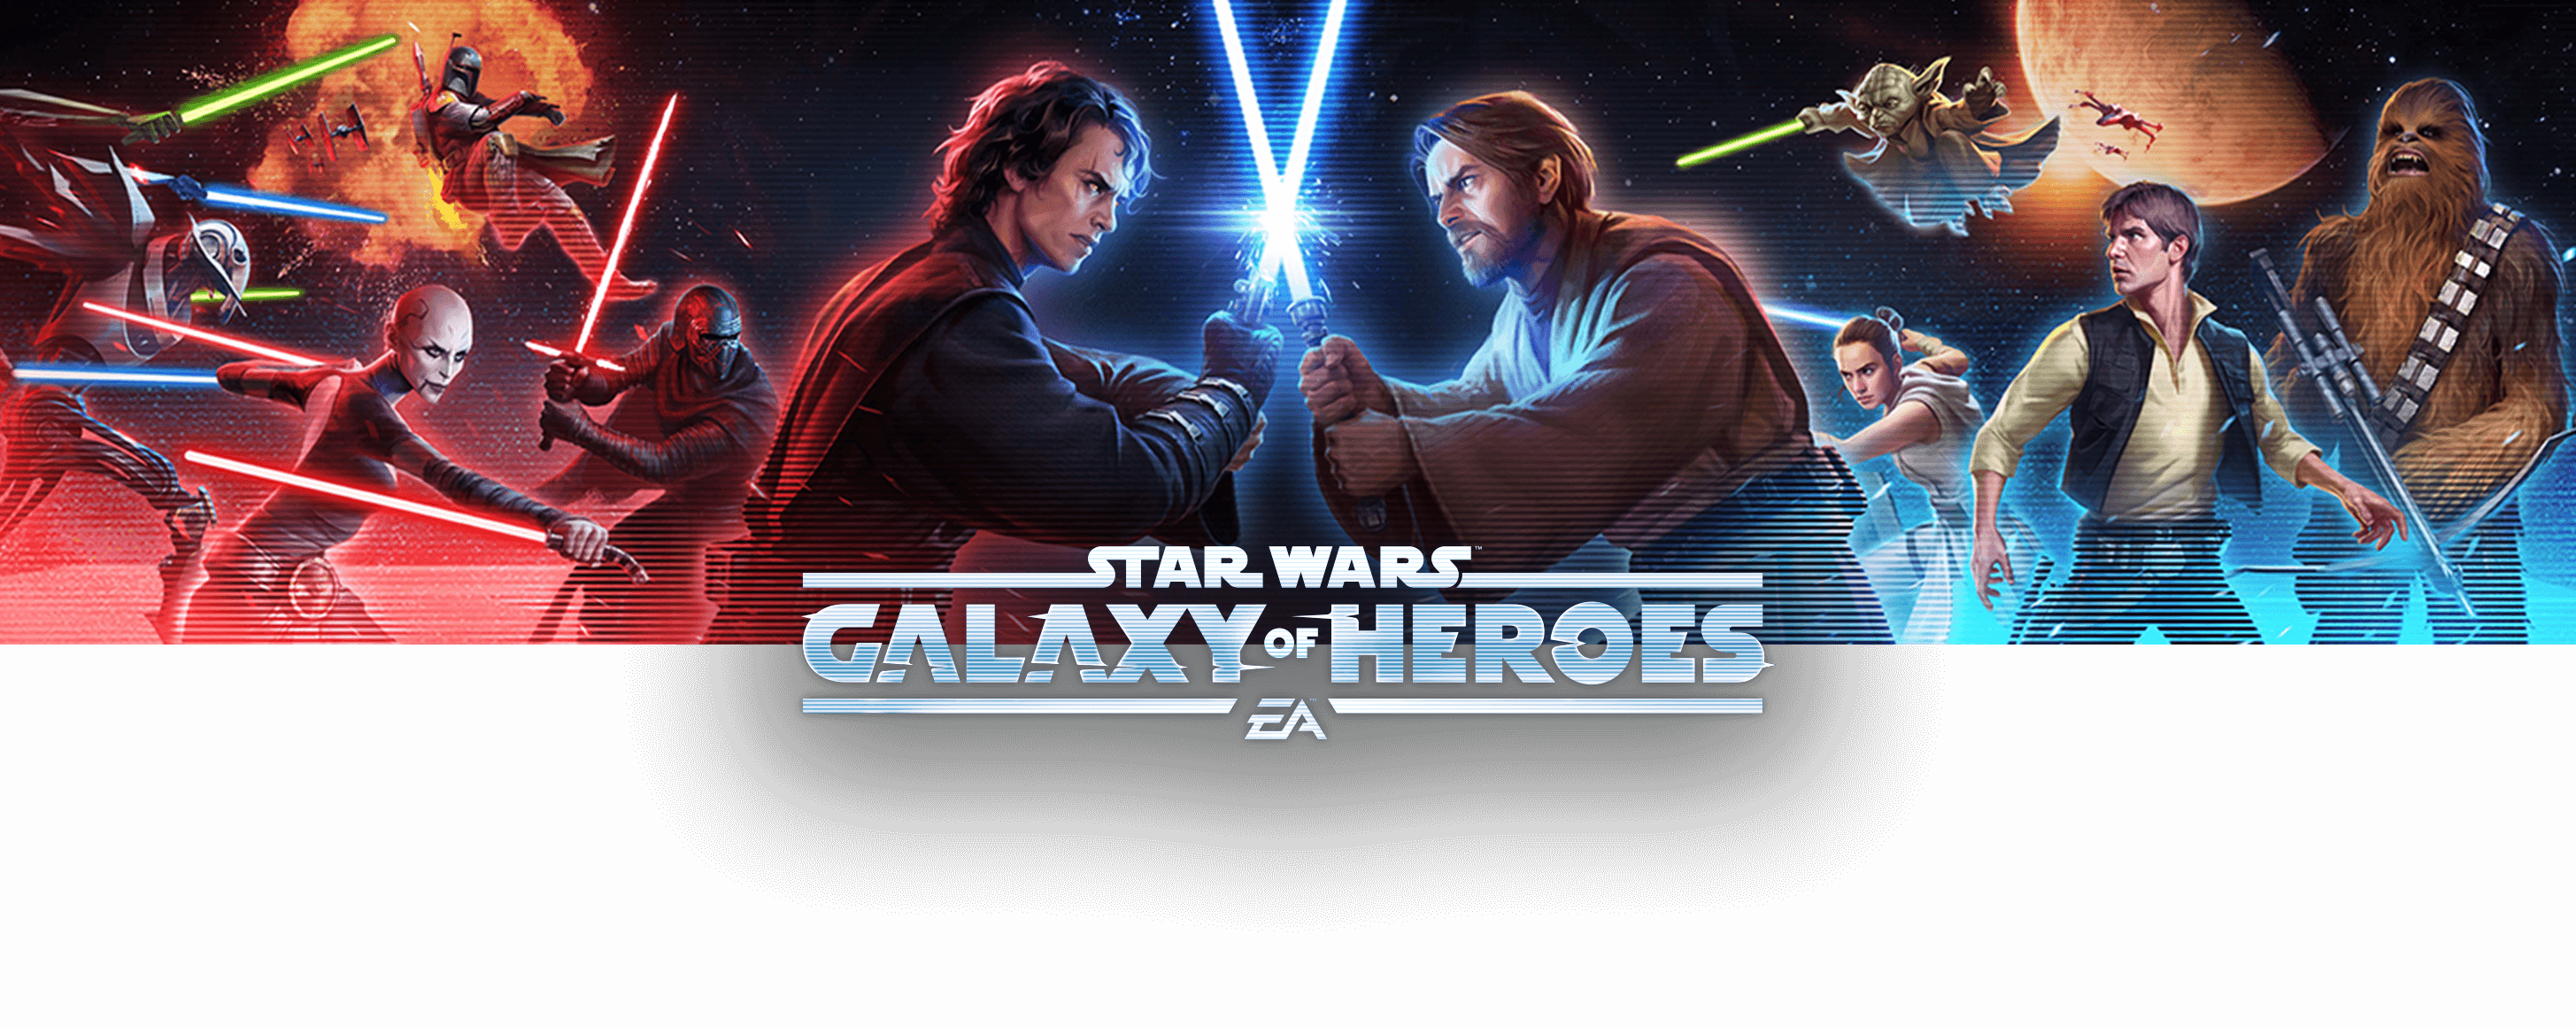 star-wars-galaxy-of-heroes-free-mobile-game-ea-official-site